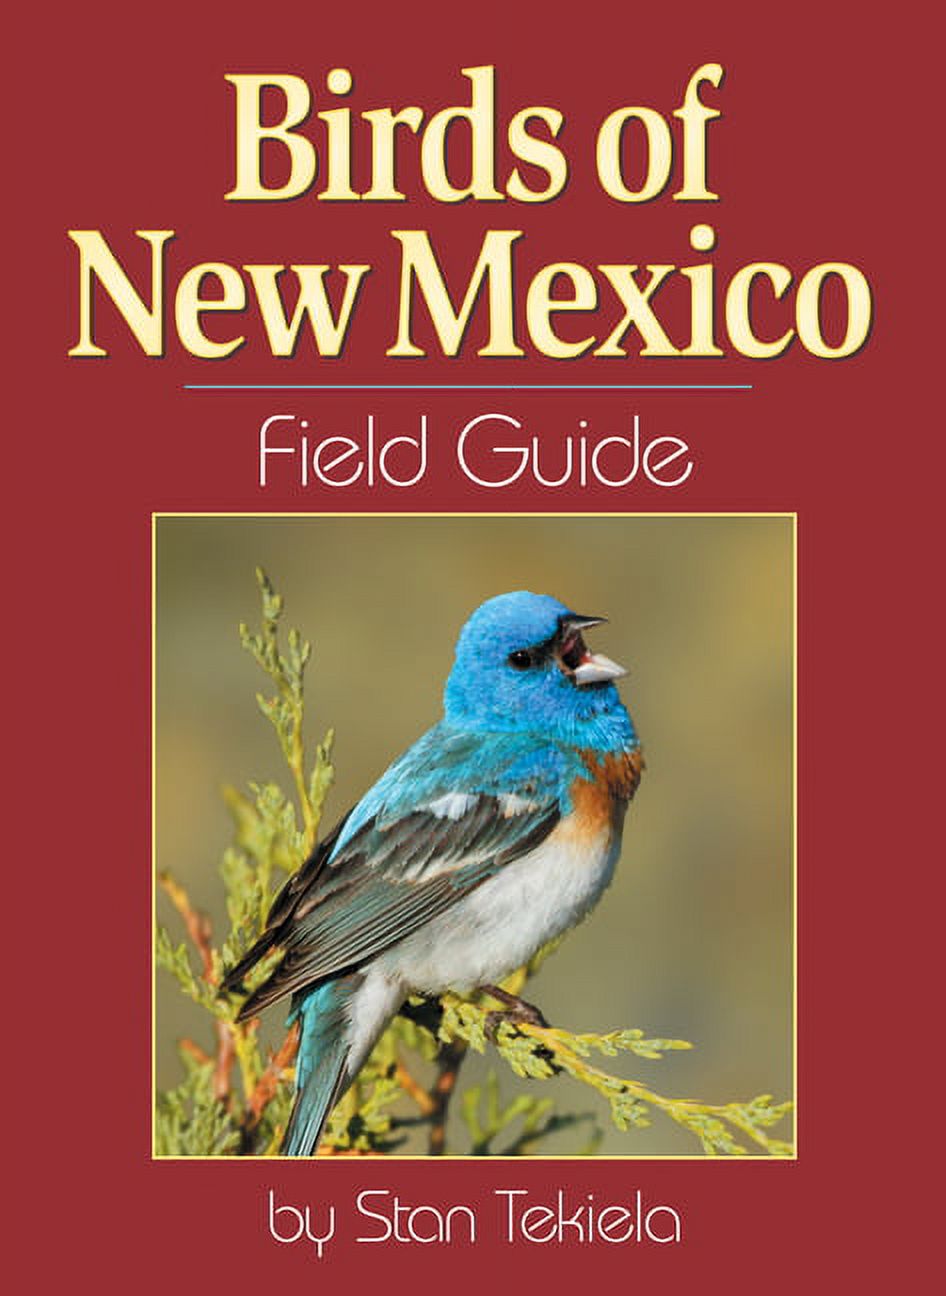 Bird Identification Guides: Birds of New Mexico Field Guide (Paperback) - image 1 of 4